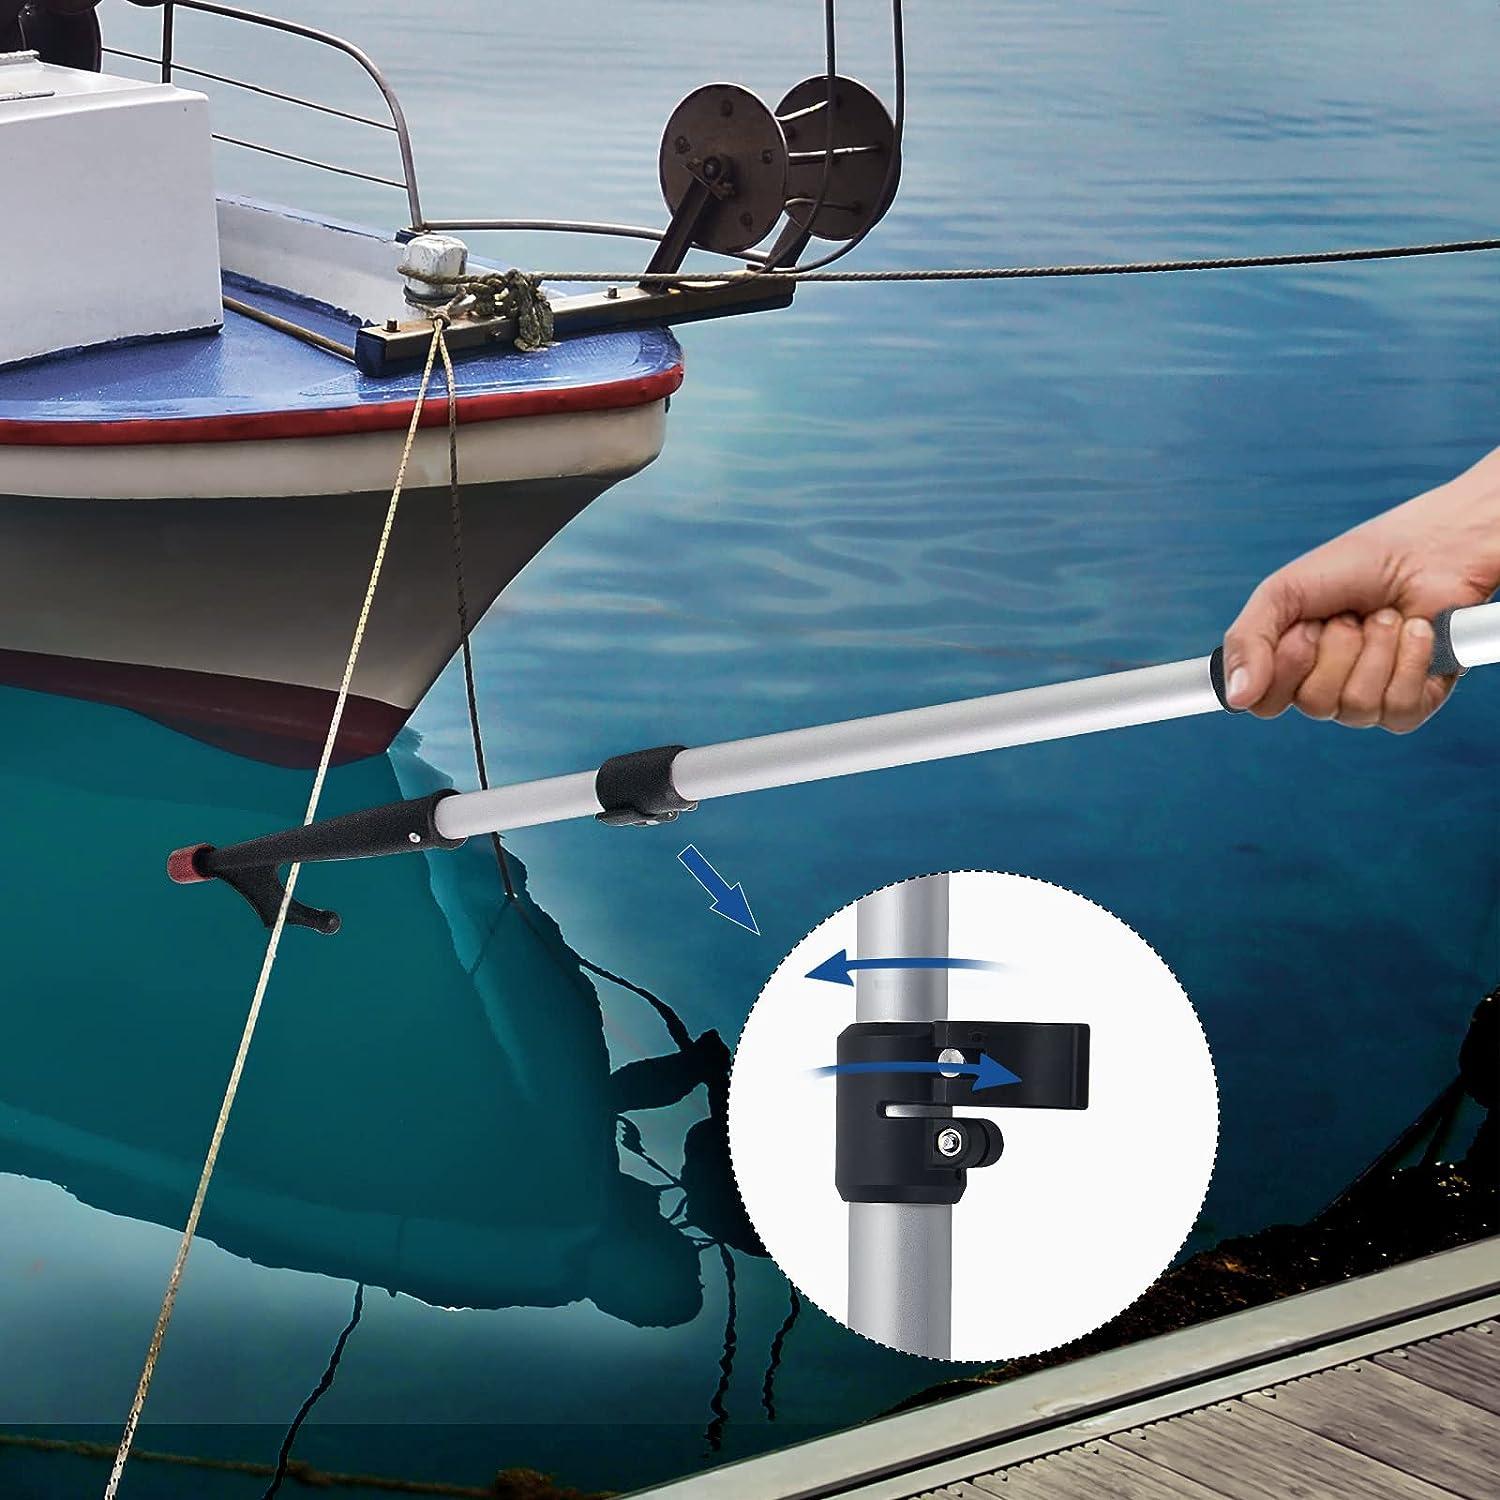 Besramtic Boat Hook Pole for Docking Telescoping from 47.2 Inches